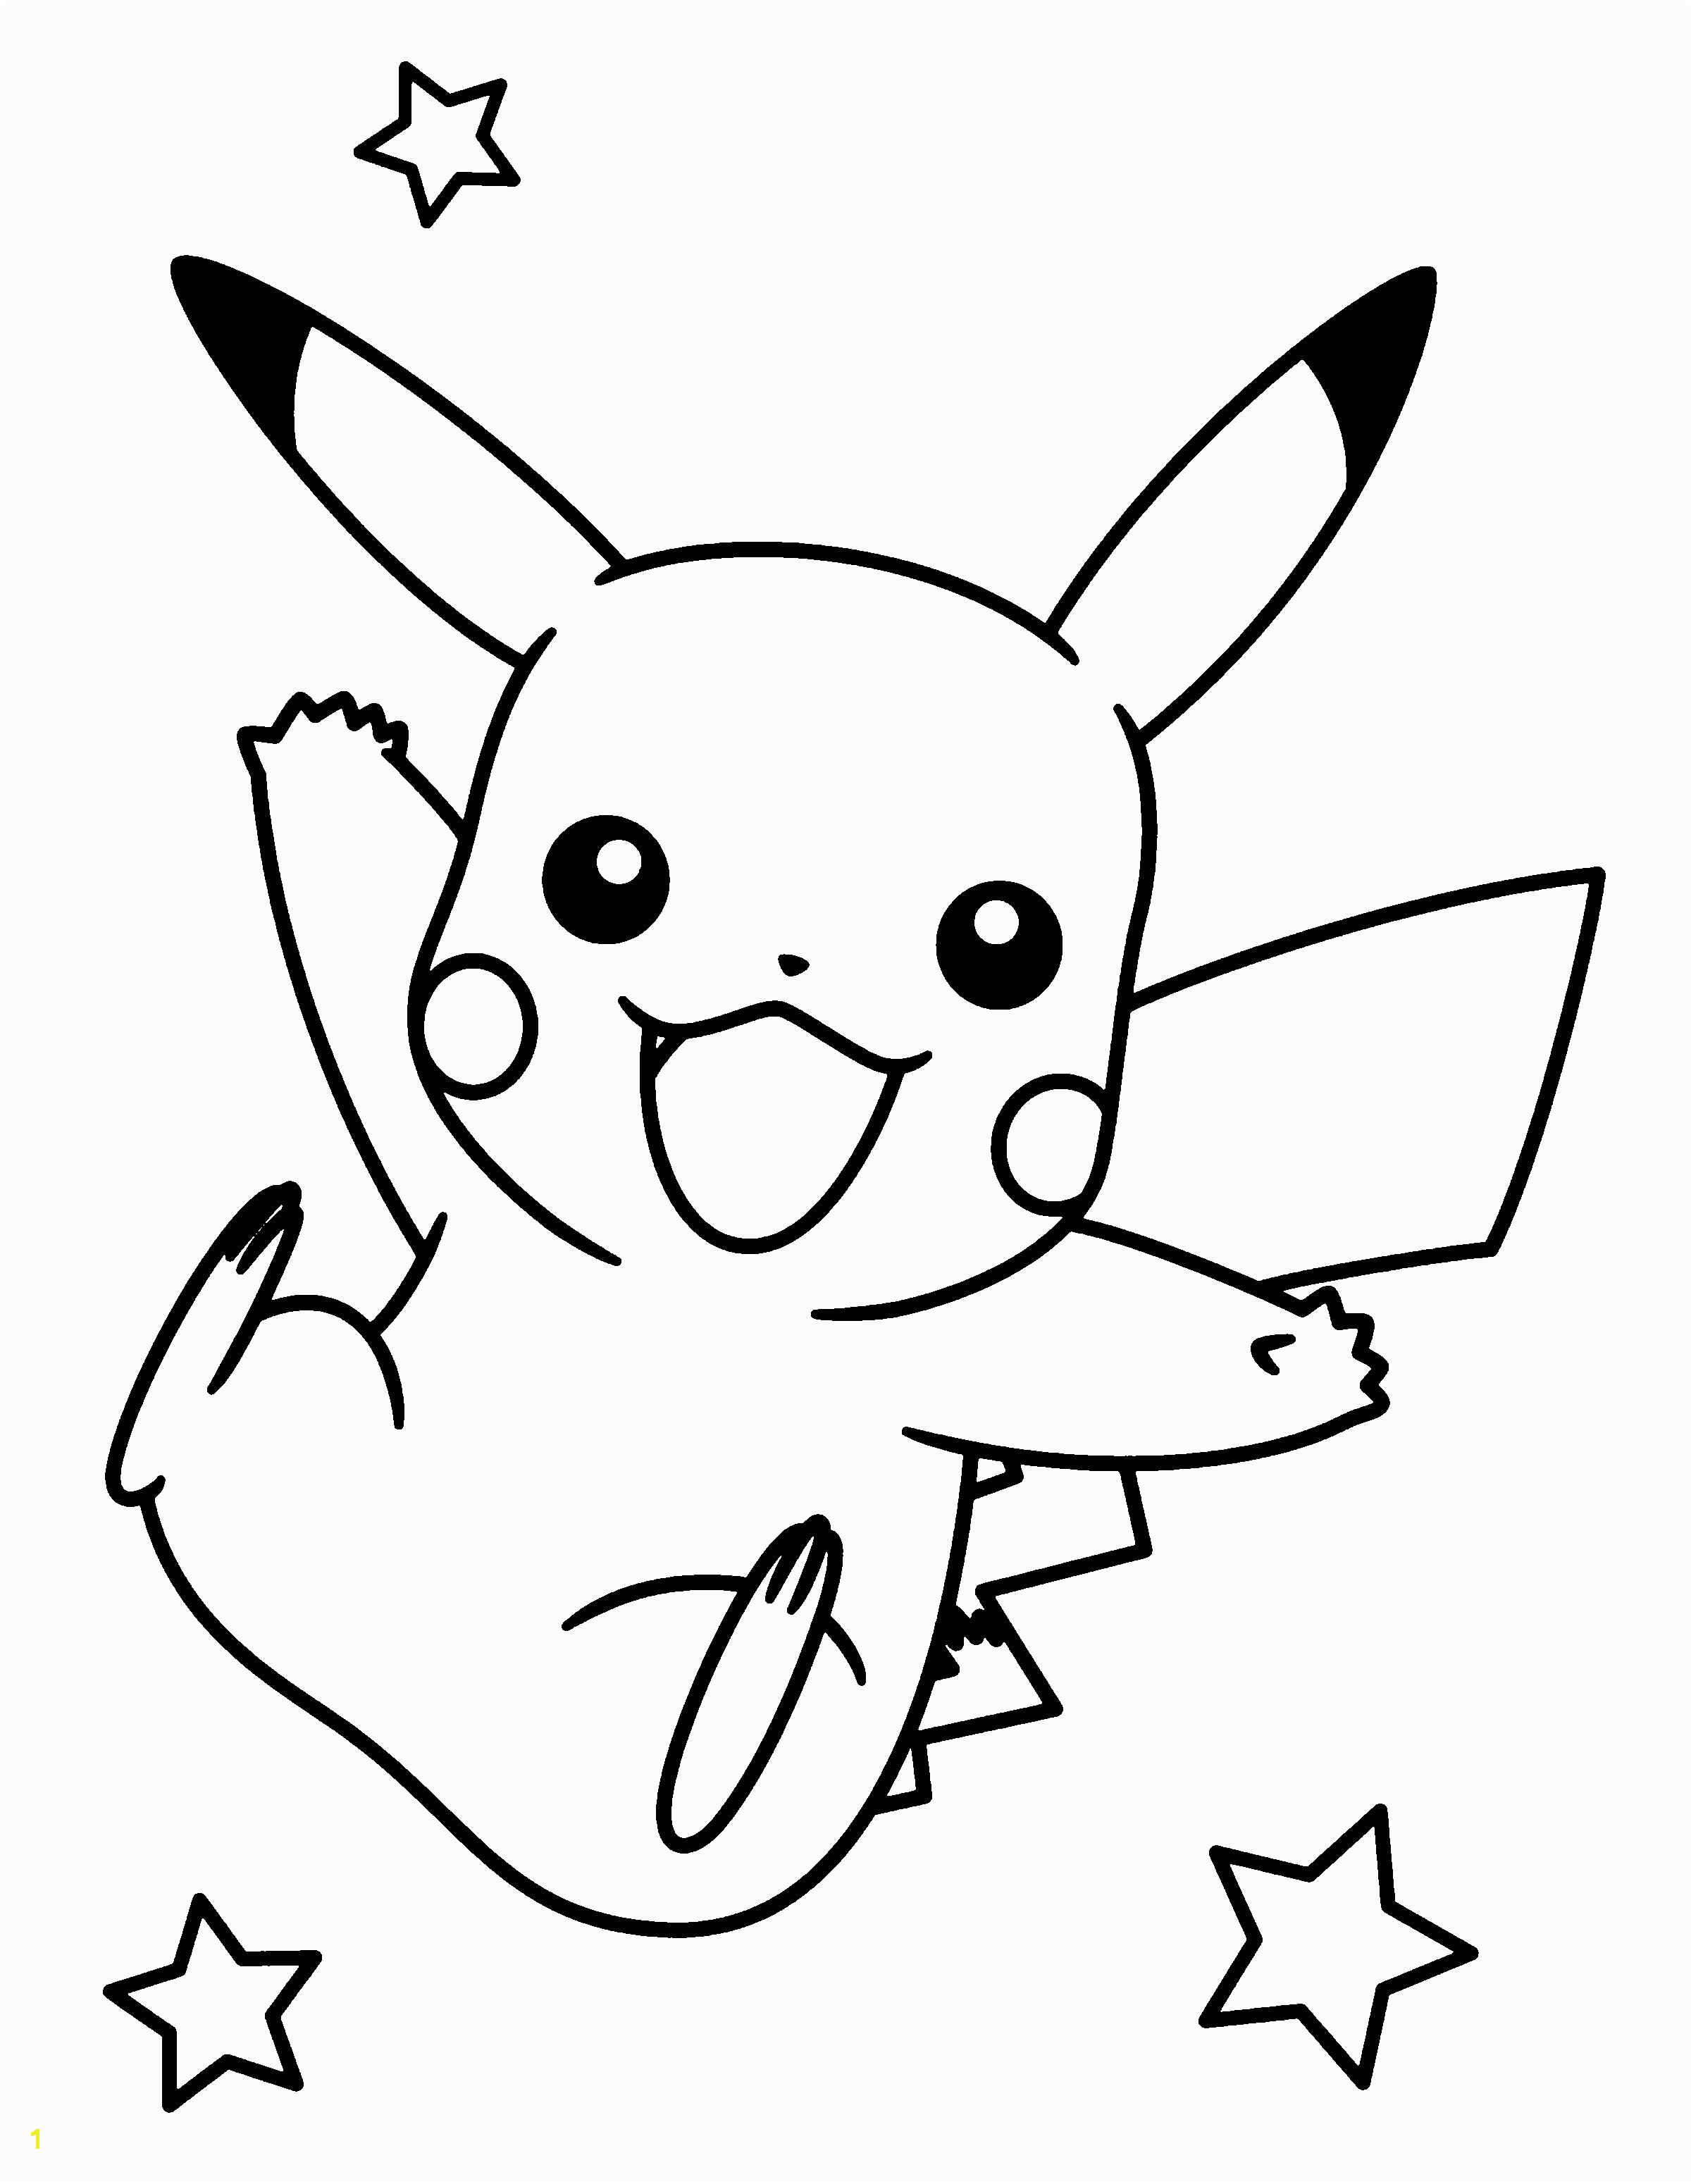 Pikachu Coloring Page Pokemon Coloring Pages Cartoon Coloring Pages Coloring Book Pages